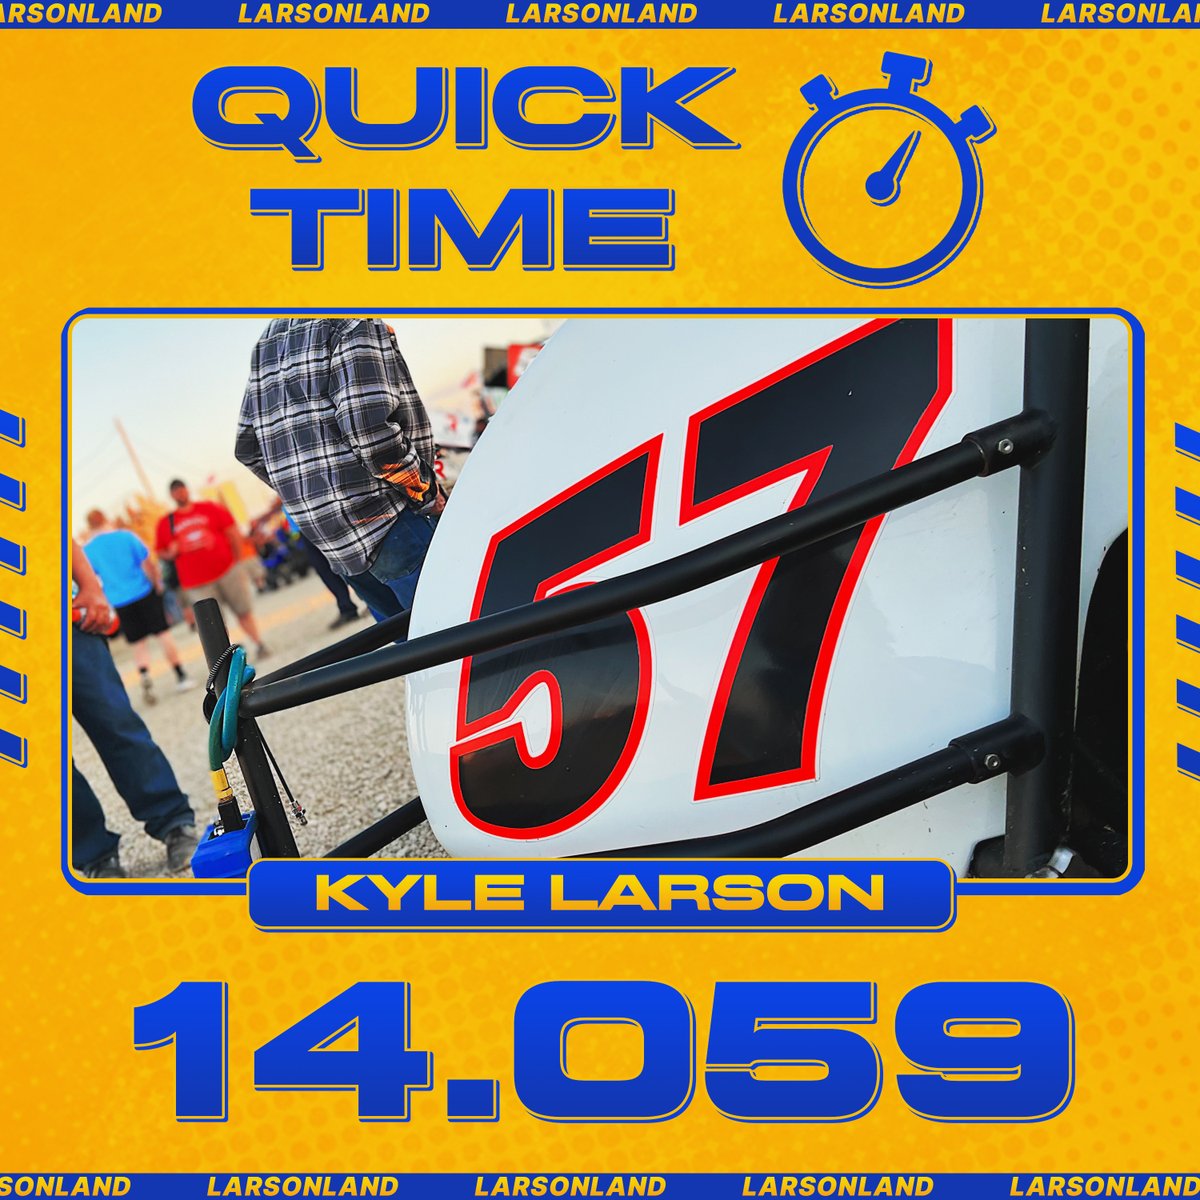 Kyle Larson ends up QUICKTIME overall in Qualifying at Wayne County! Yung Money will start on the pole of Heat Race #1!

#kylelarson #yungmoney #highlimitracing #sprintcar #dirttrackracing #grassrootsracing